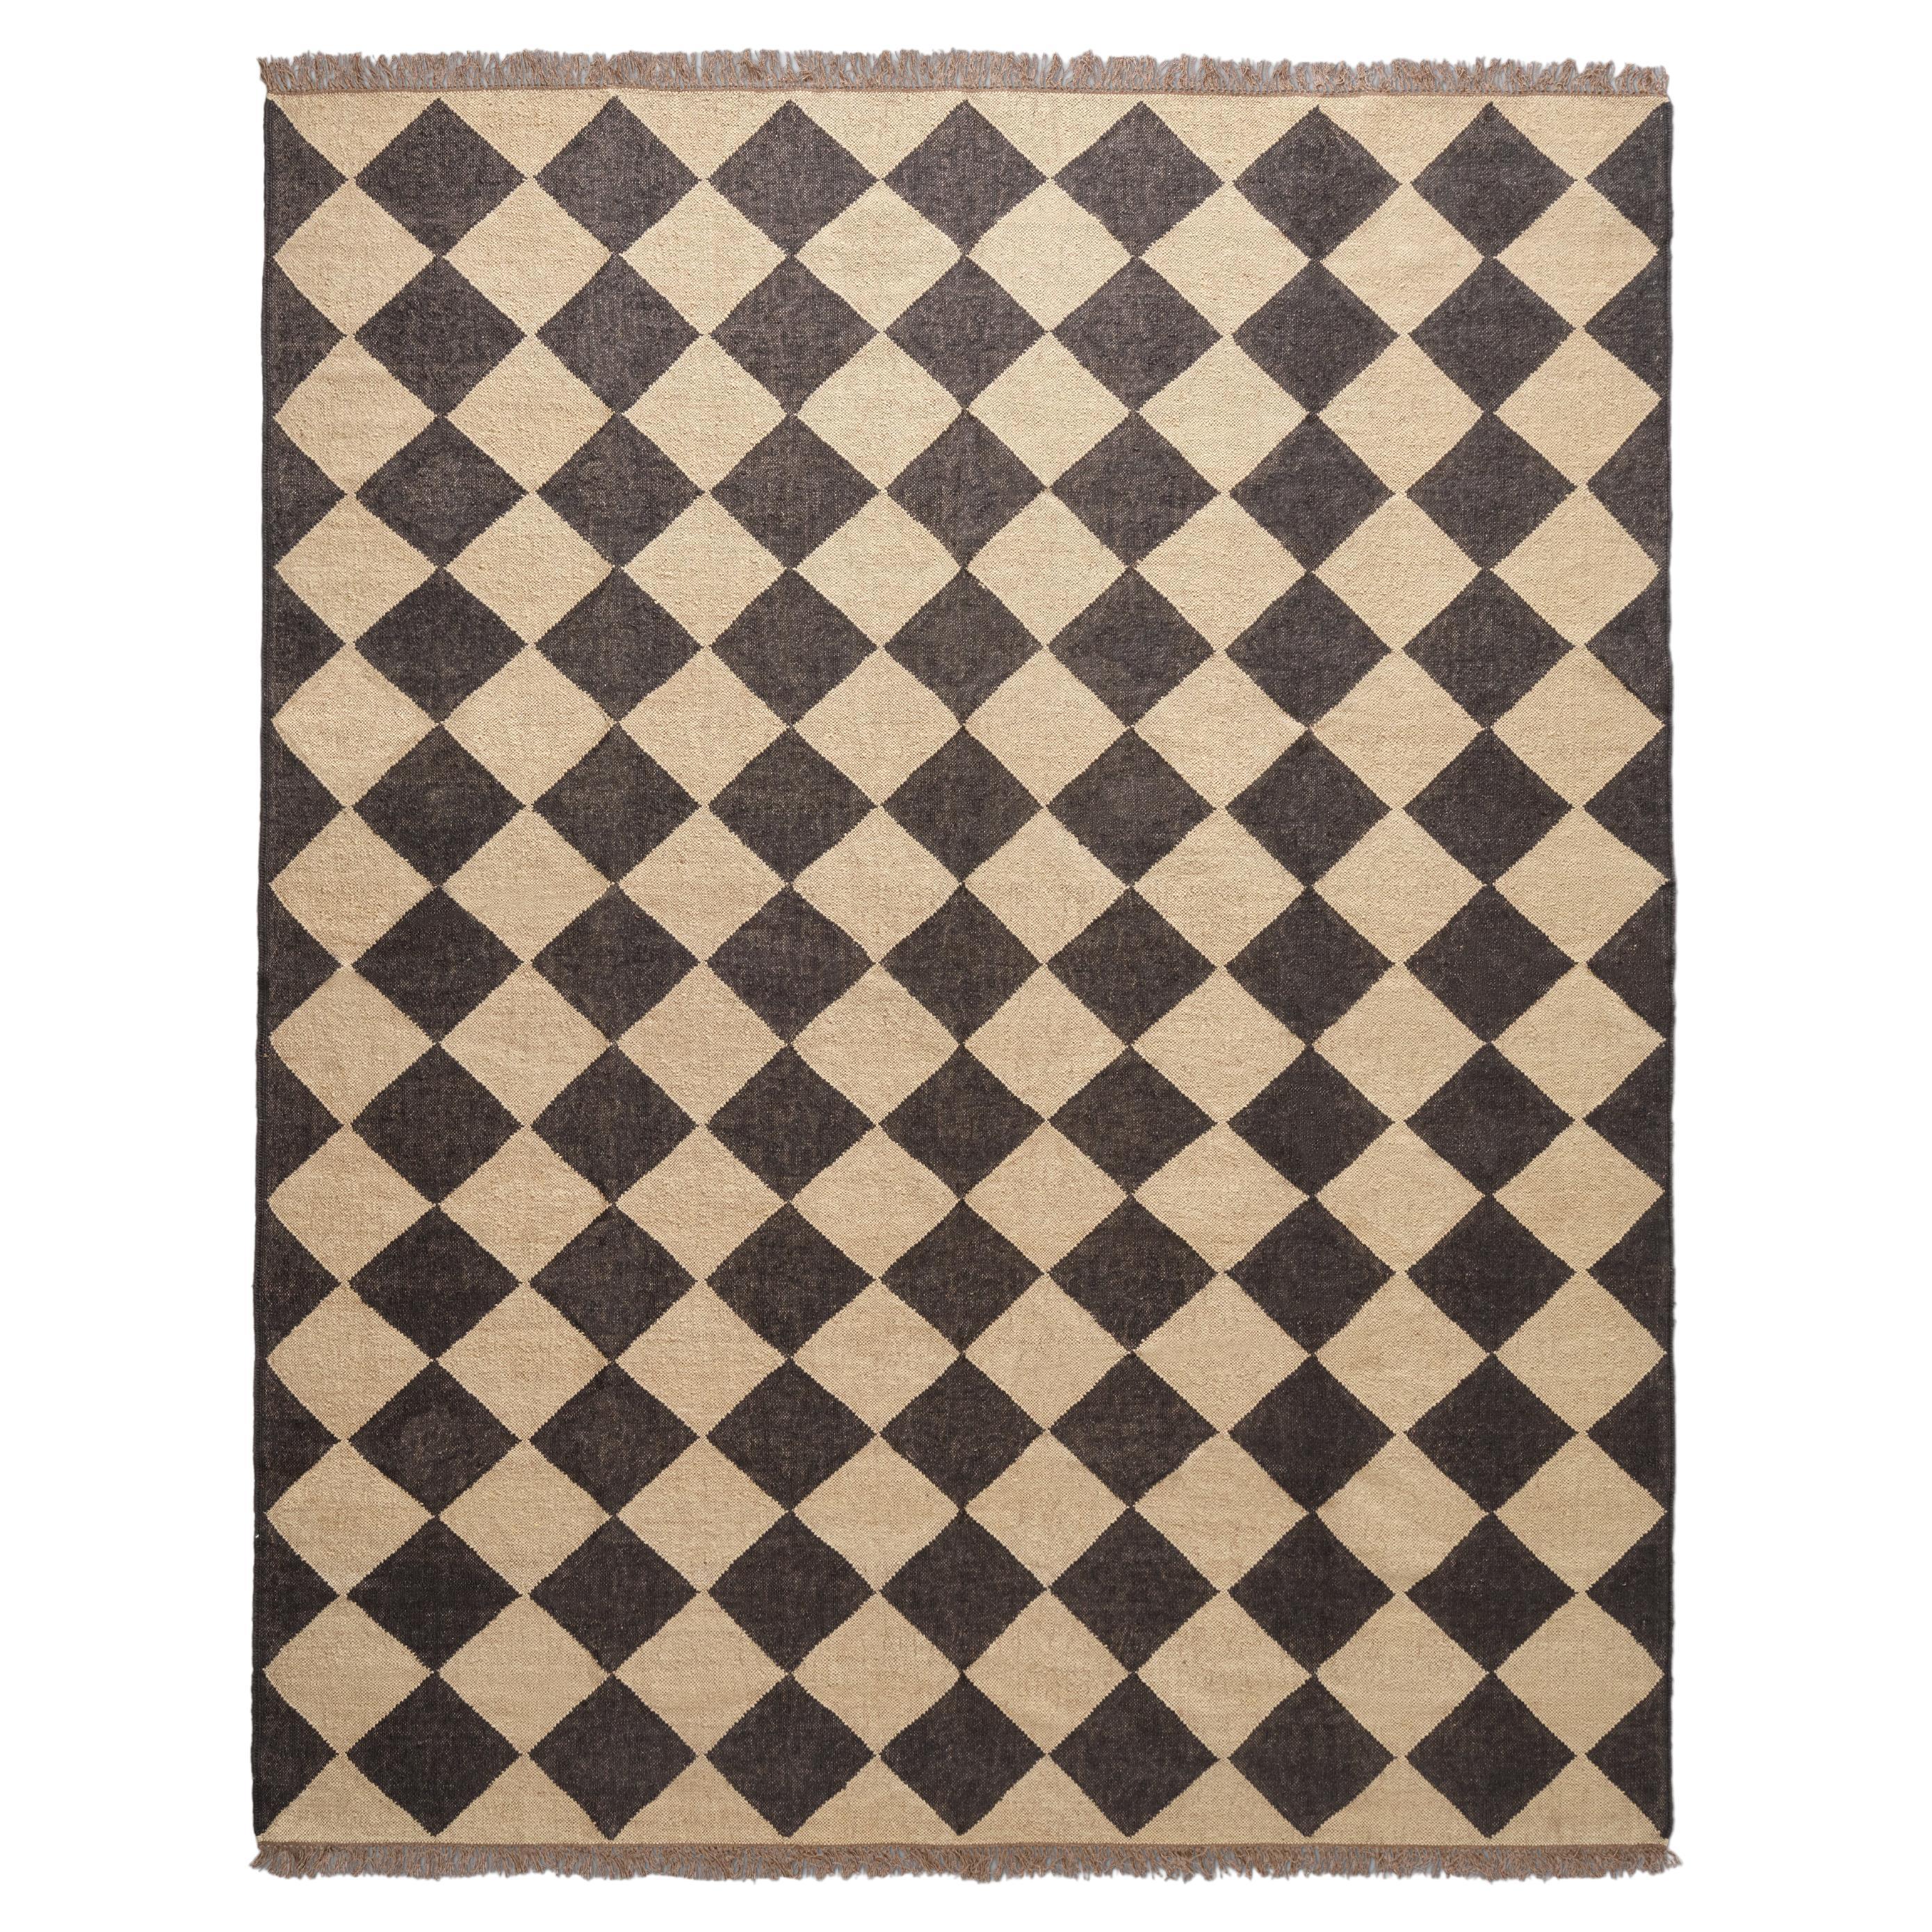 The Forsyth Checkerboard Rug - Diamond Check in Off Black, 11x14 For Sale